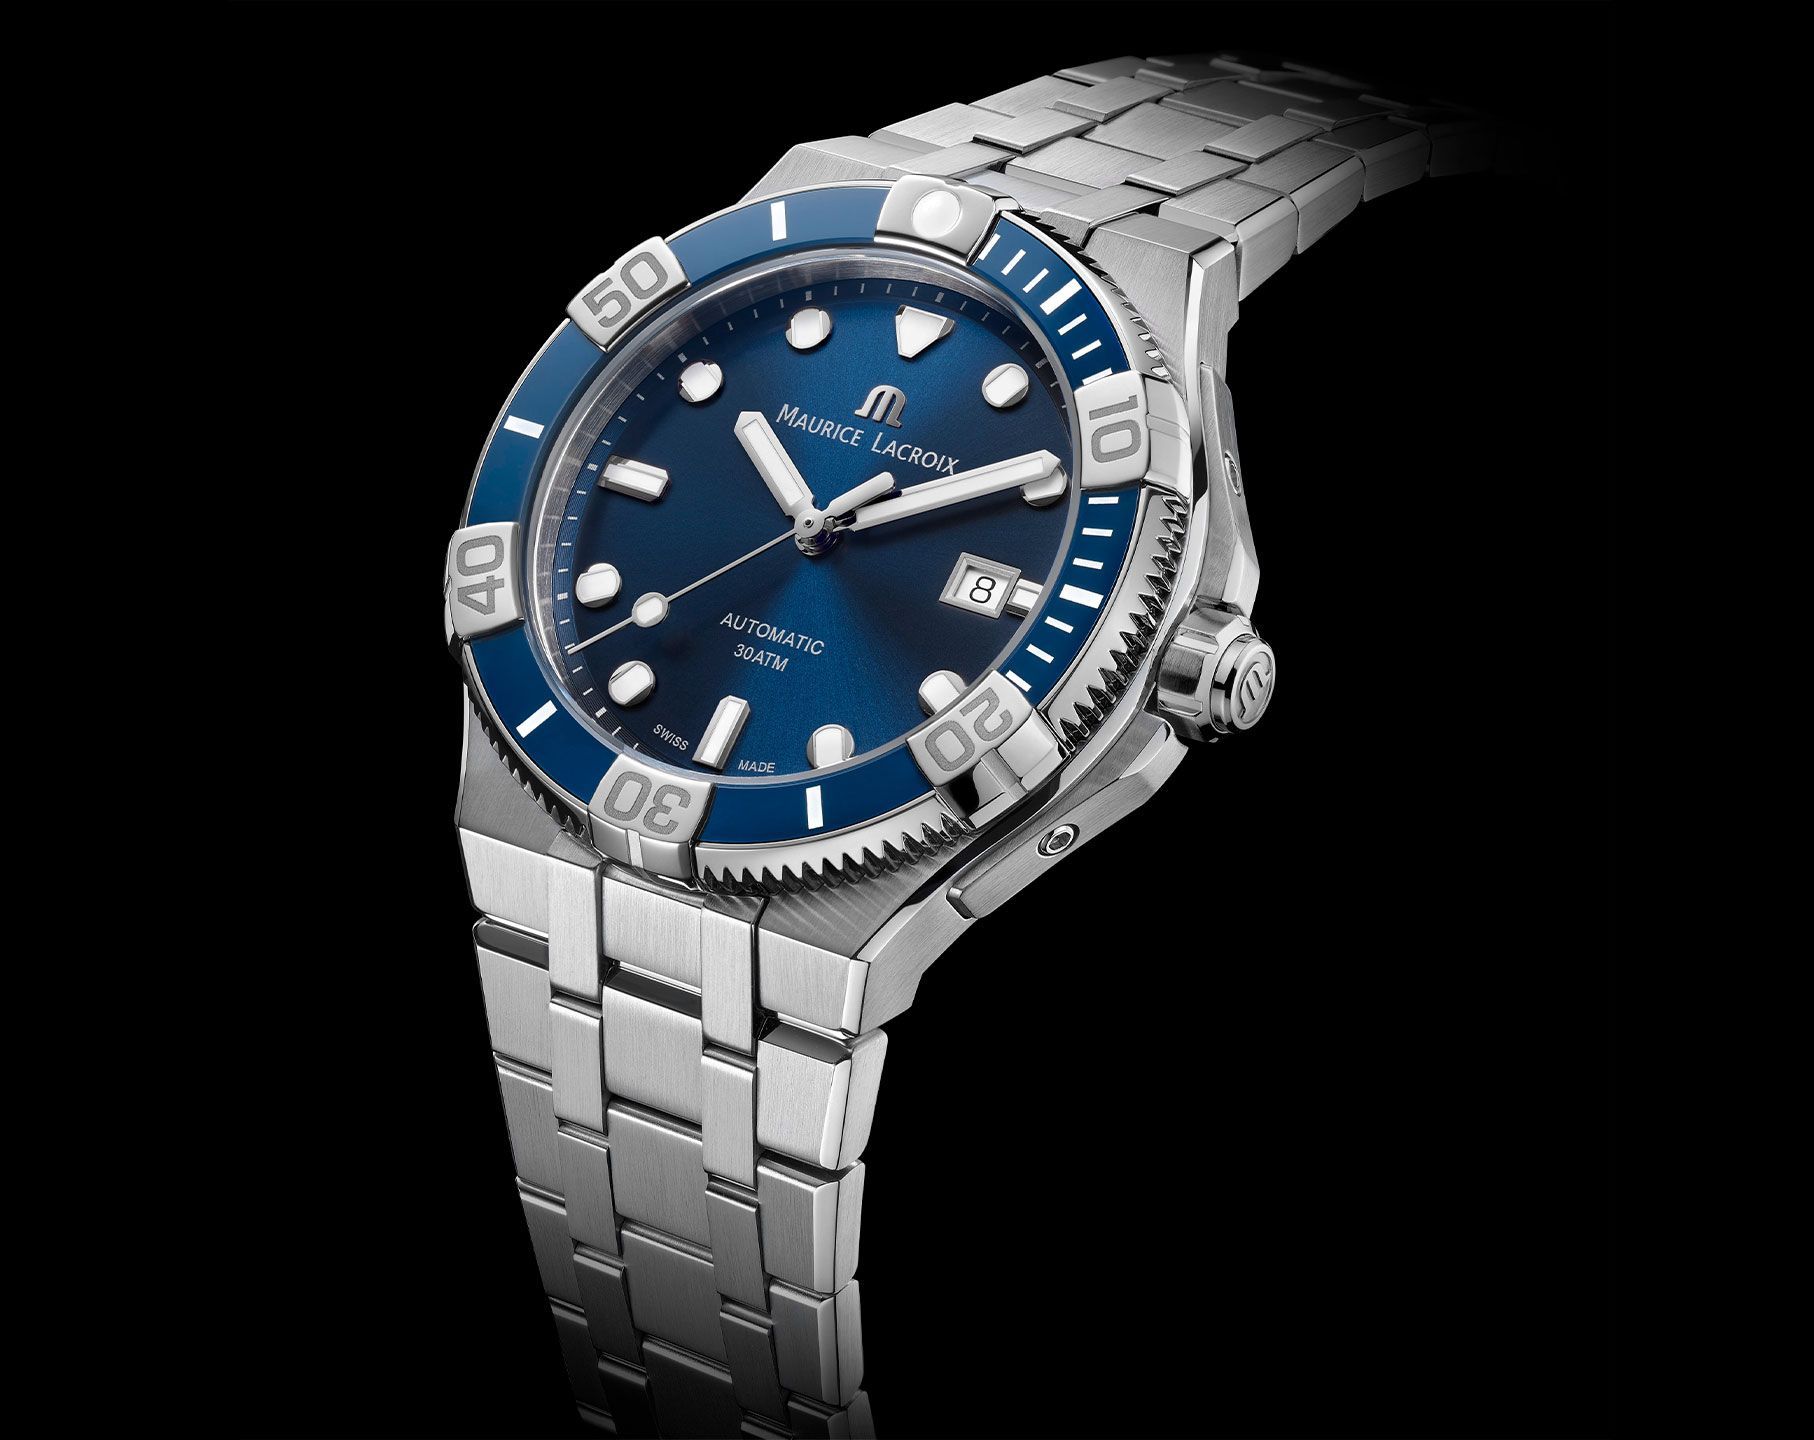 Dial Aikon mm Lacroix 43 Blue Watch Maurice Automatic in